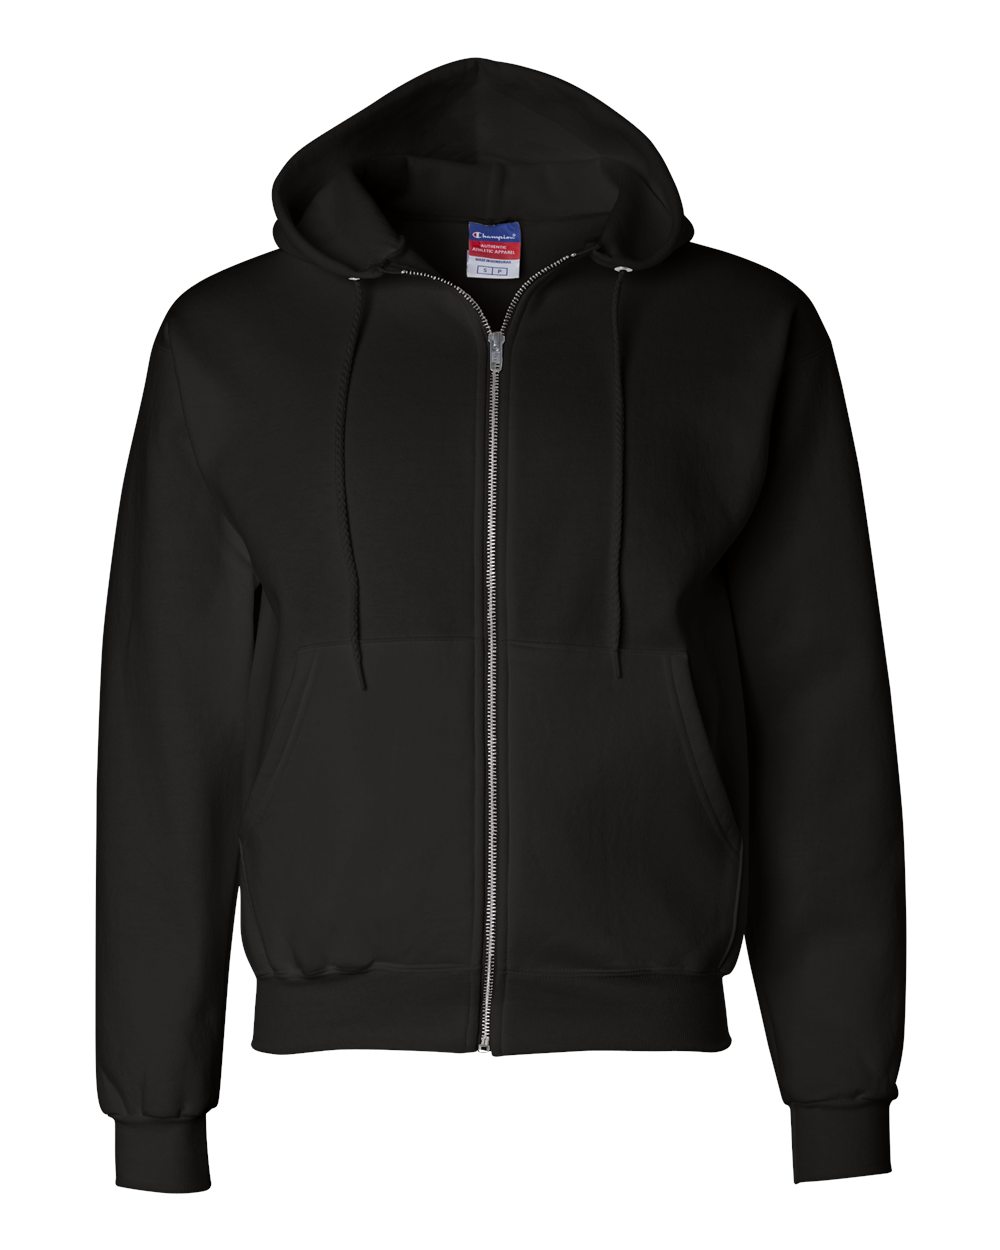 Details about  / Champion Adult 9 oz Double Dry Eco Full-Zip Hood Jumper Top Hoodie S800 S-3XL